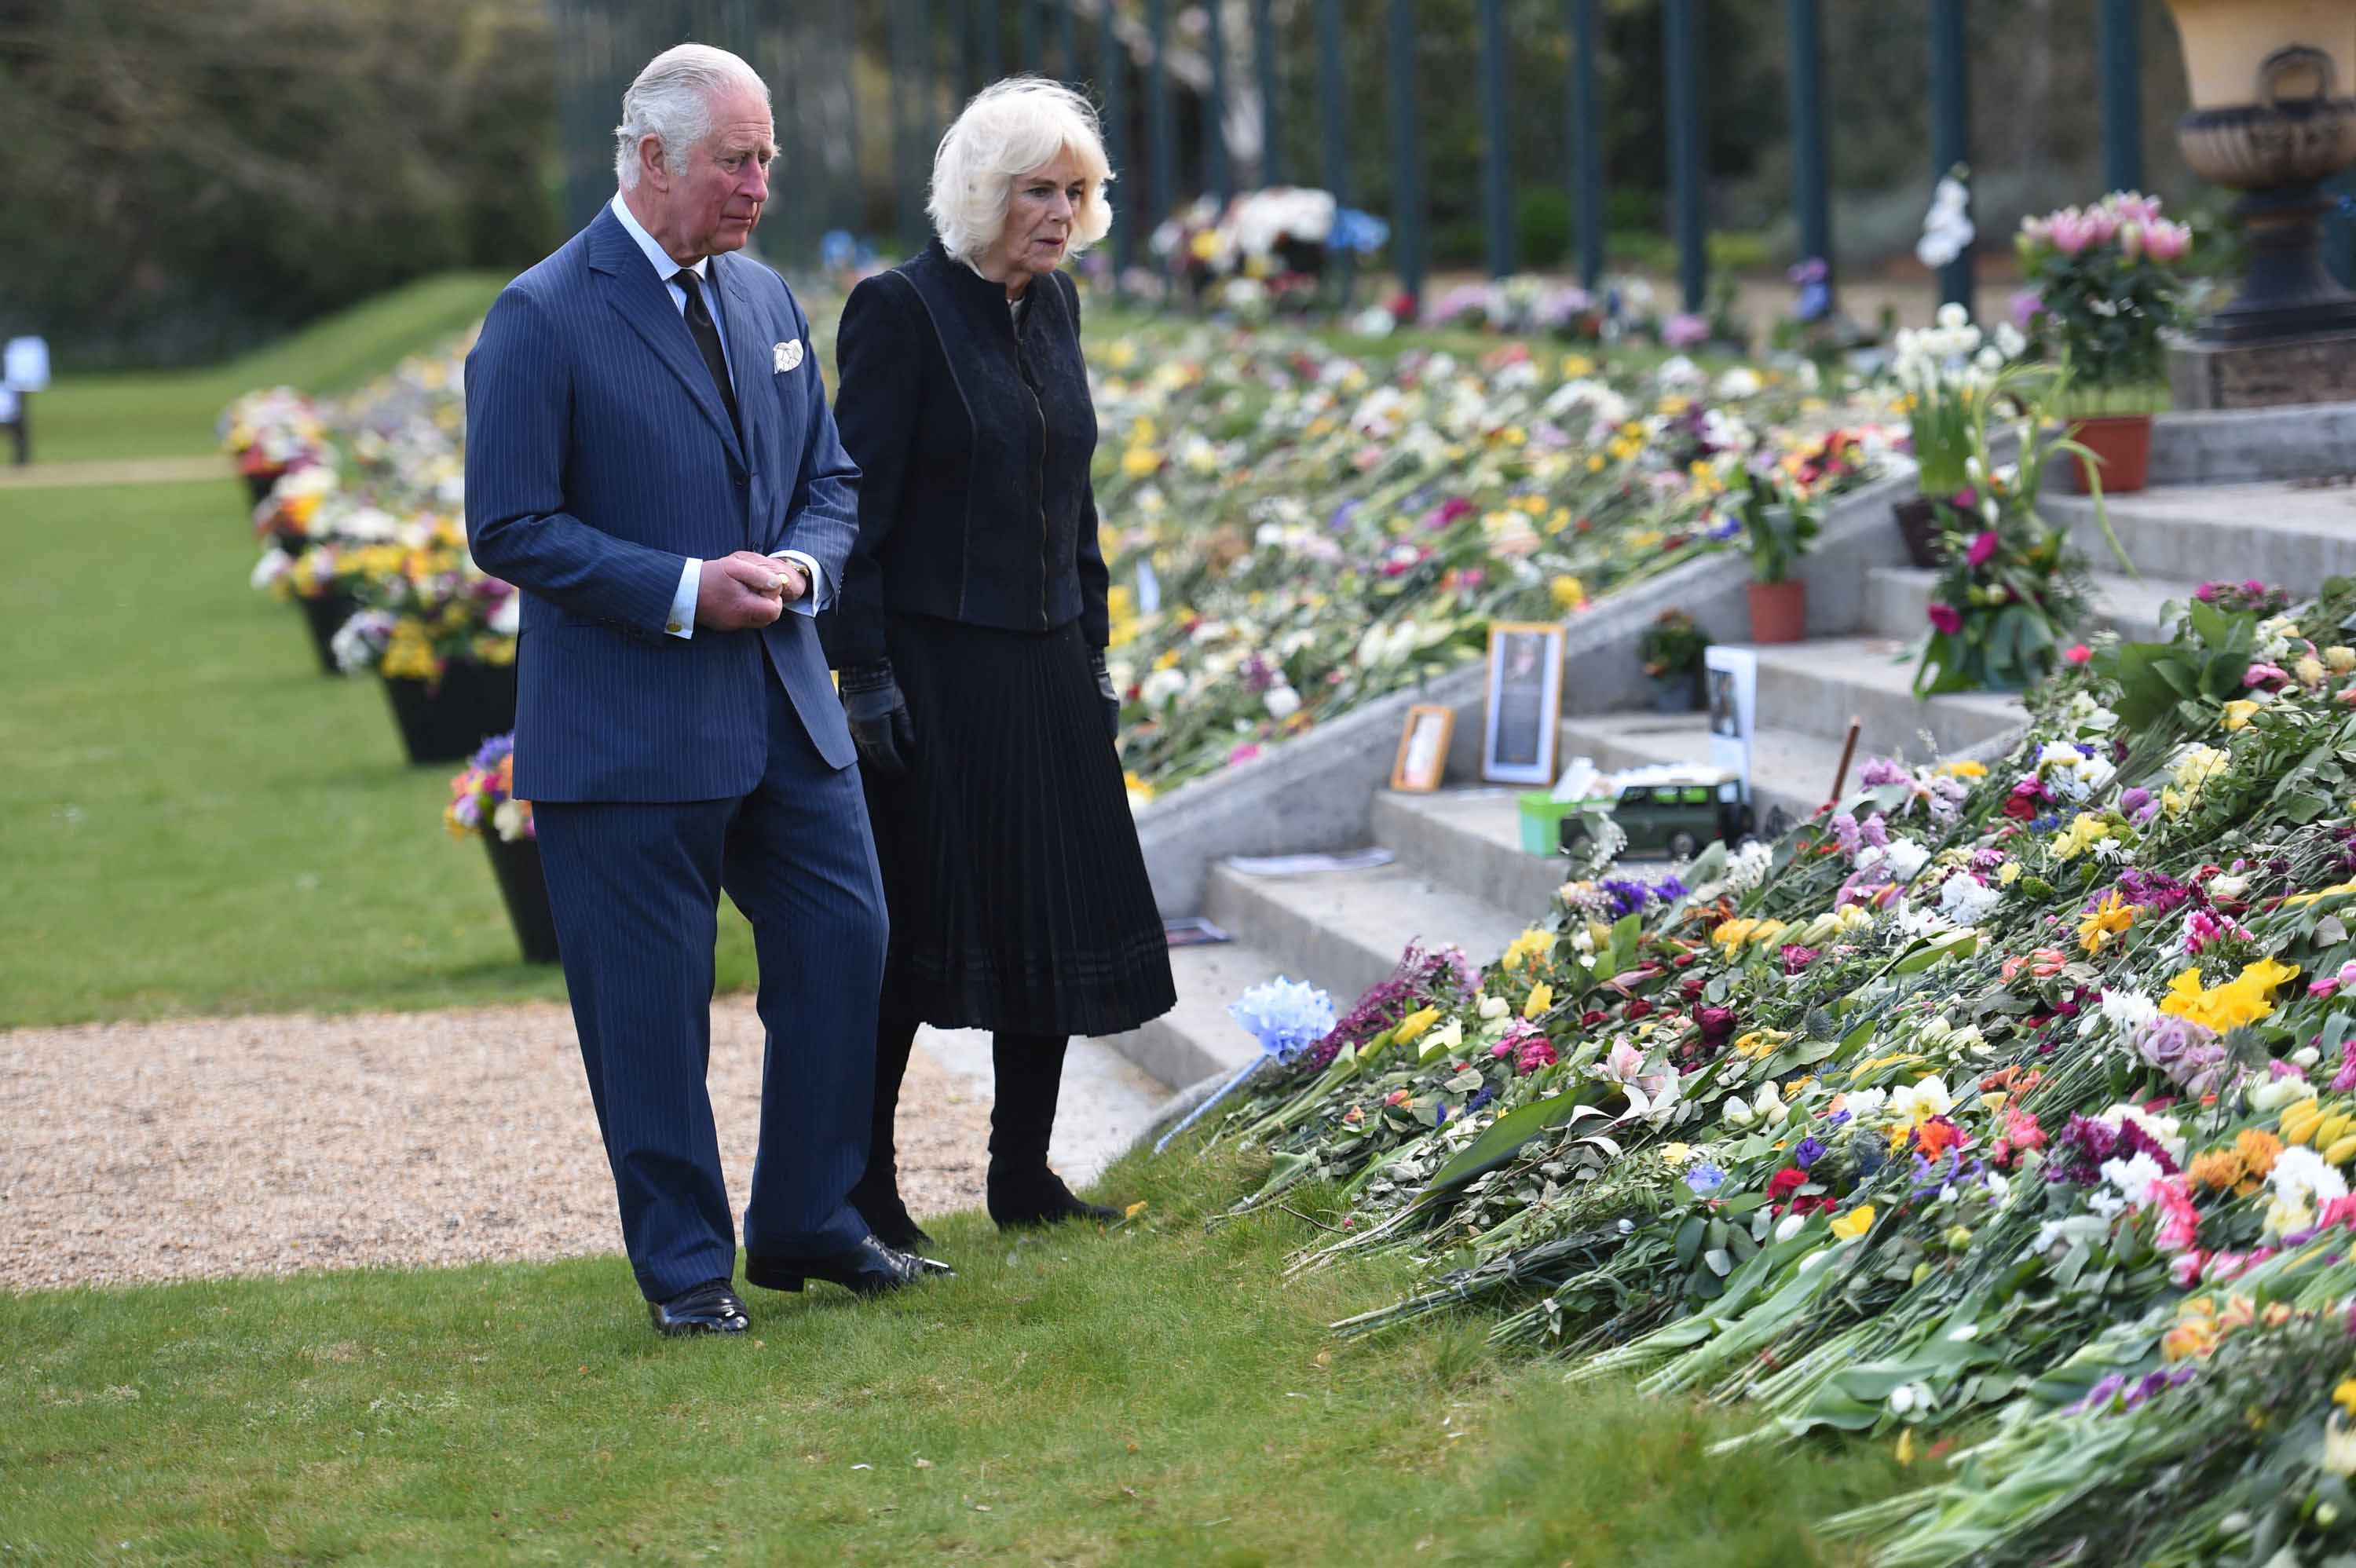 Britain's Prince Charles, Prince of Wales and Britain's Camilla, Duchess of Cornwall visit the gardens of Marlborough House in London on April 15, to view flowers and messages of condolence left by members of the public outside Buckingham Palace. 